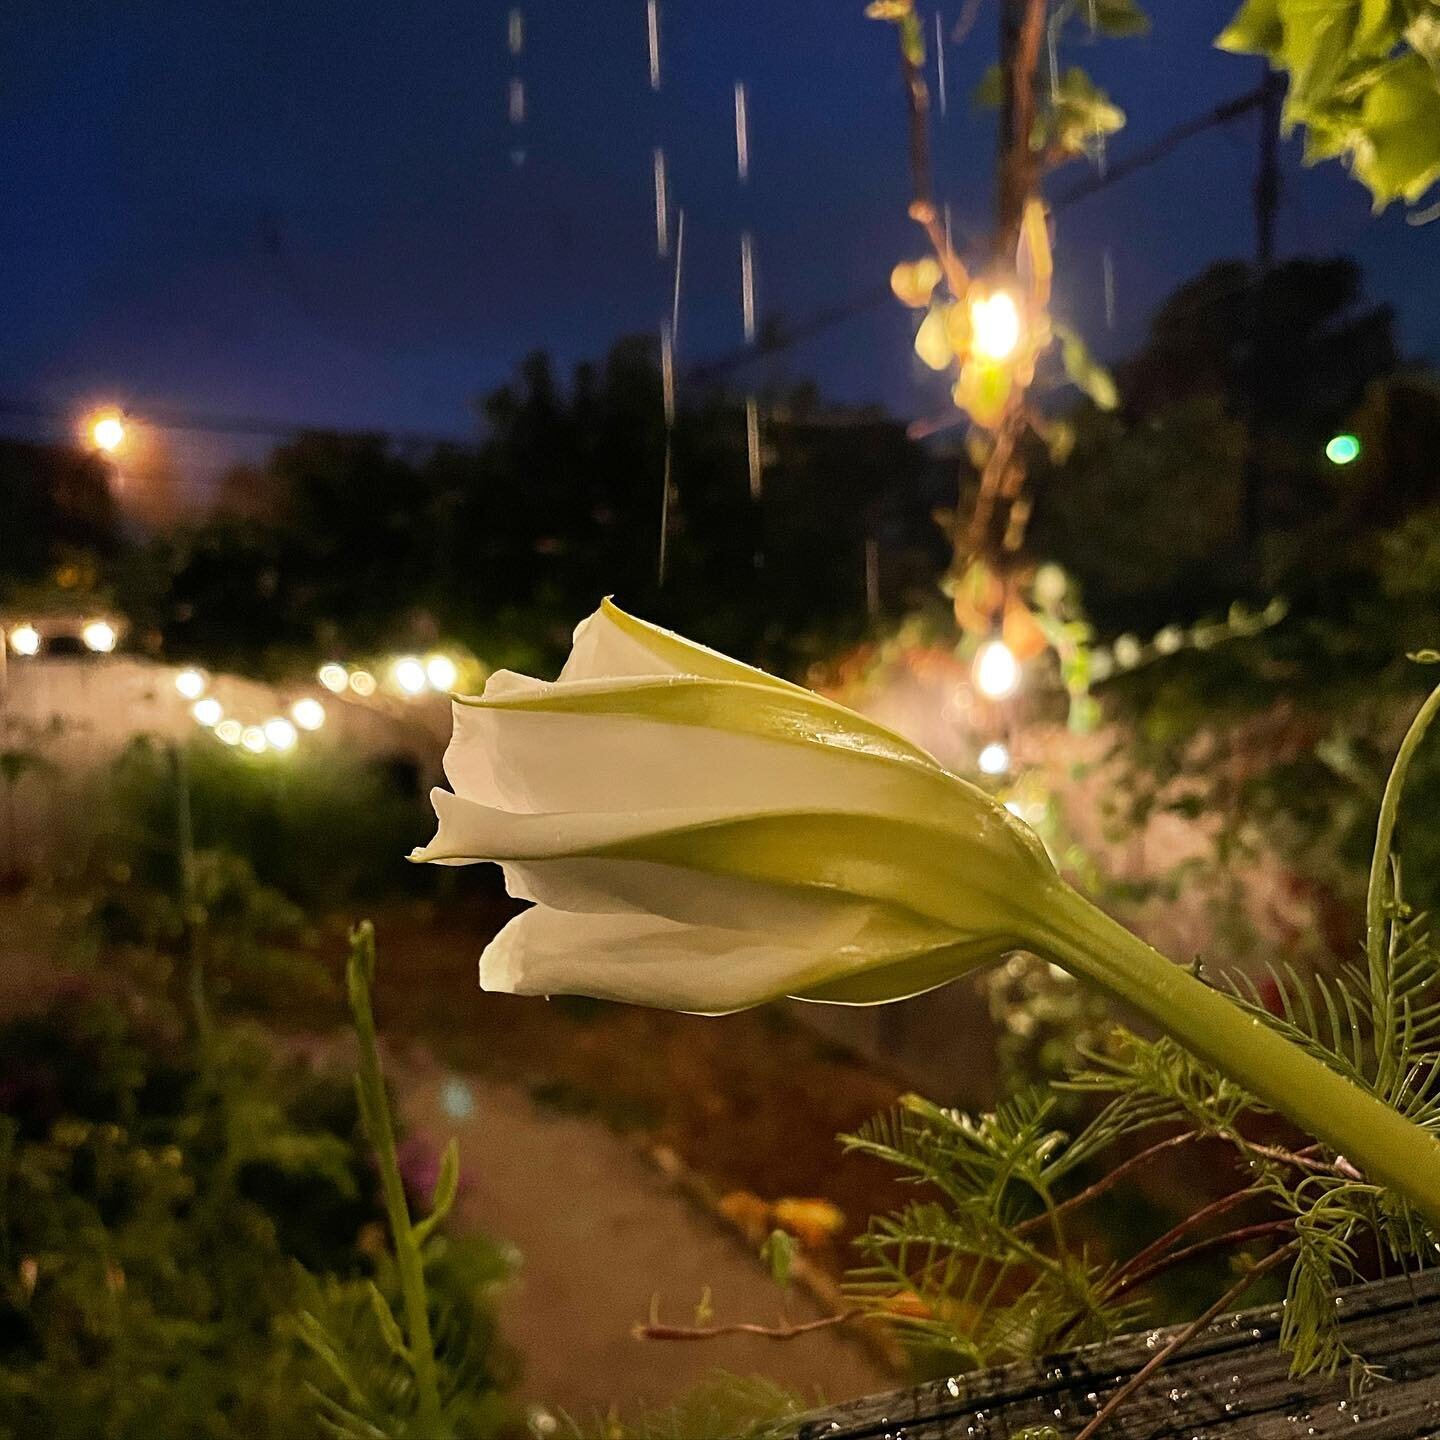 Second flower waited for a thunderstorm.